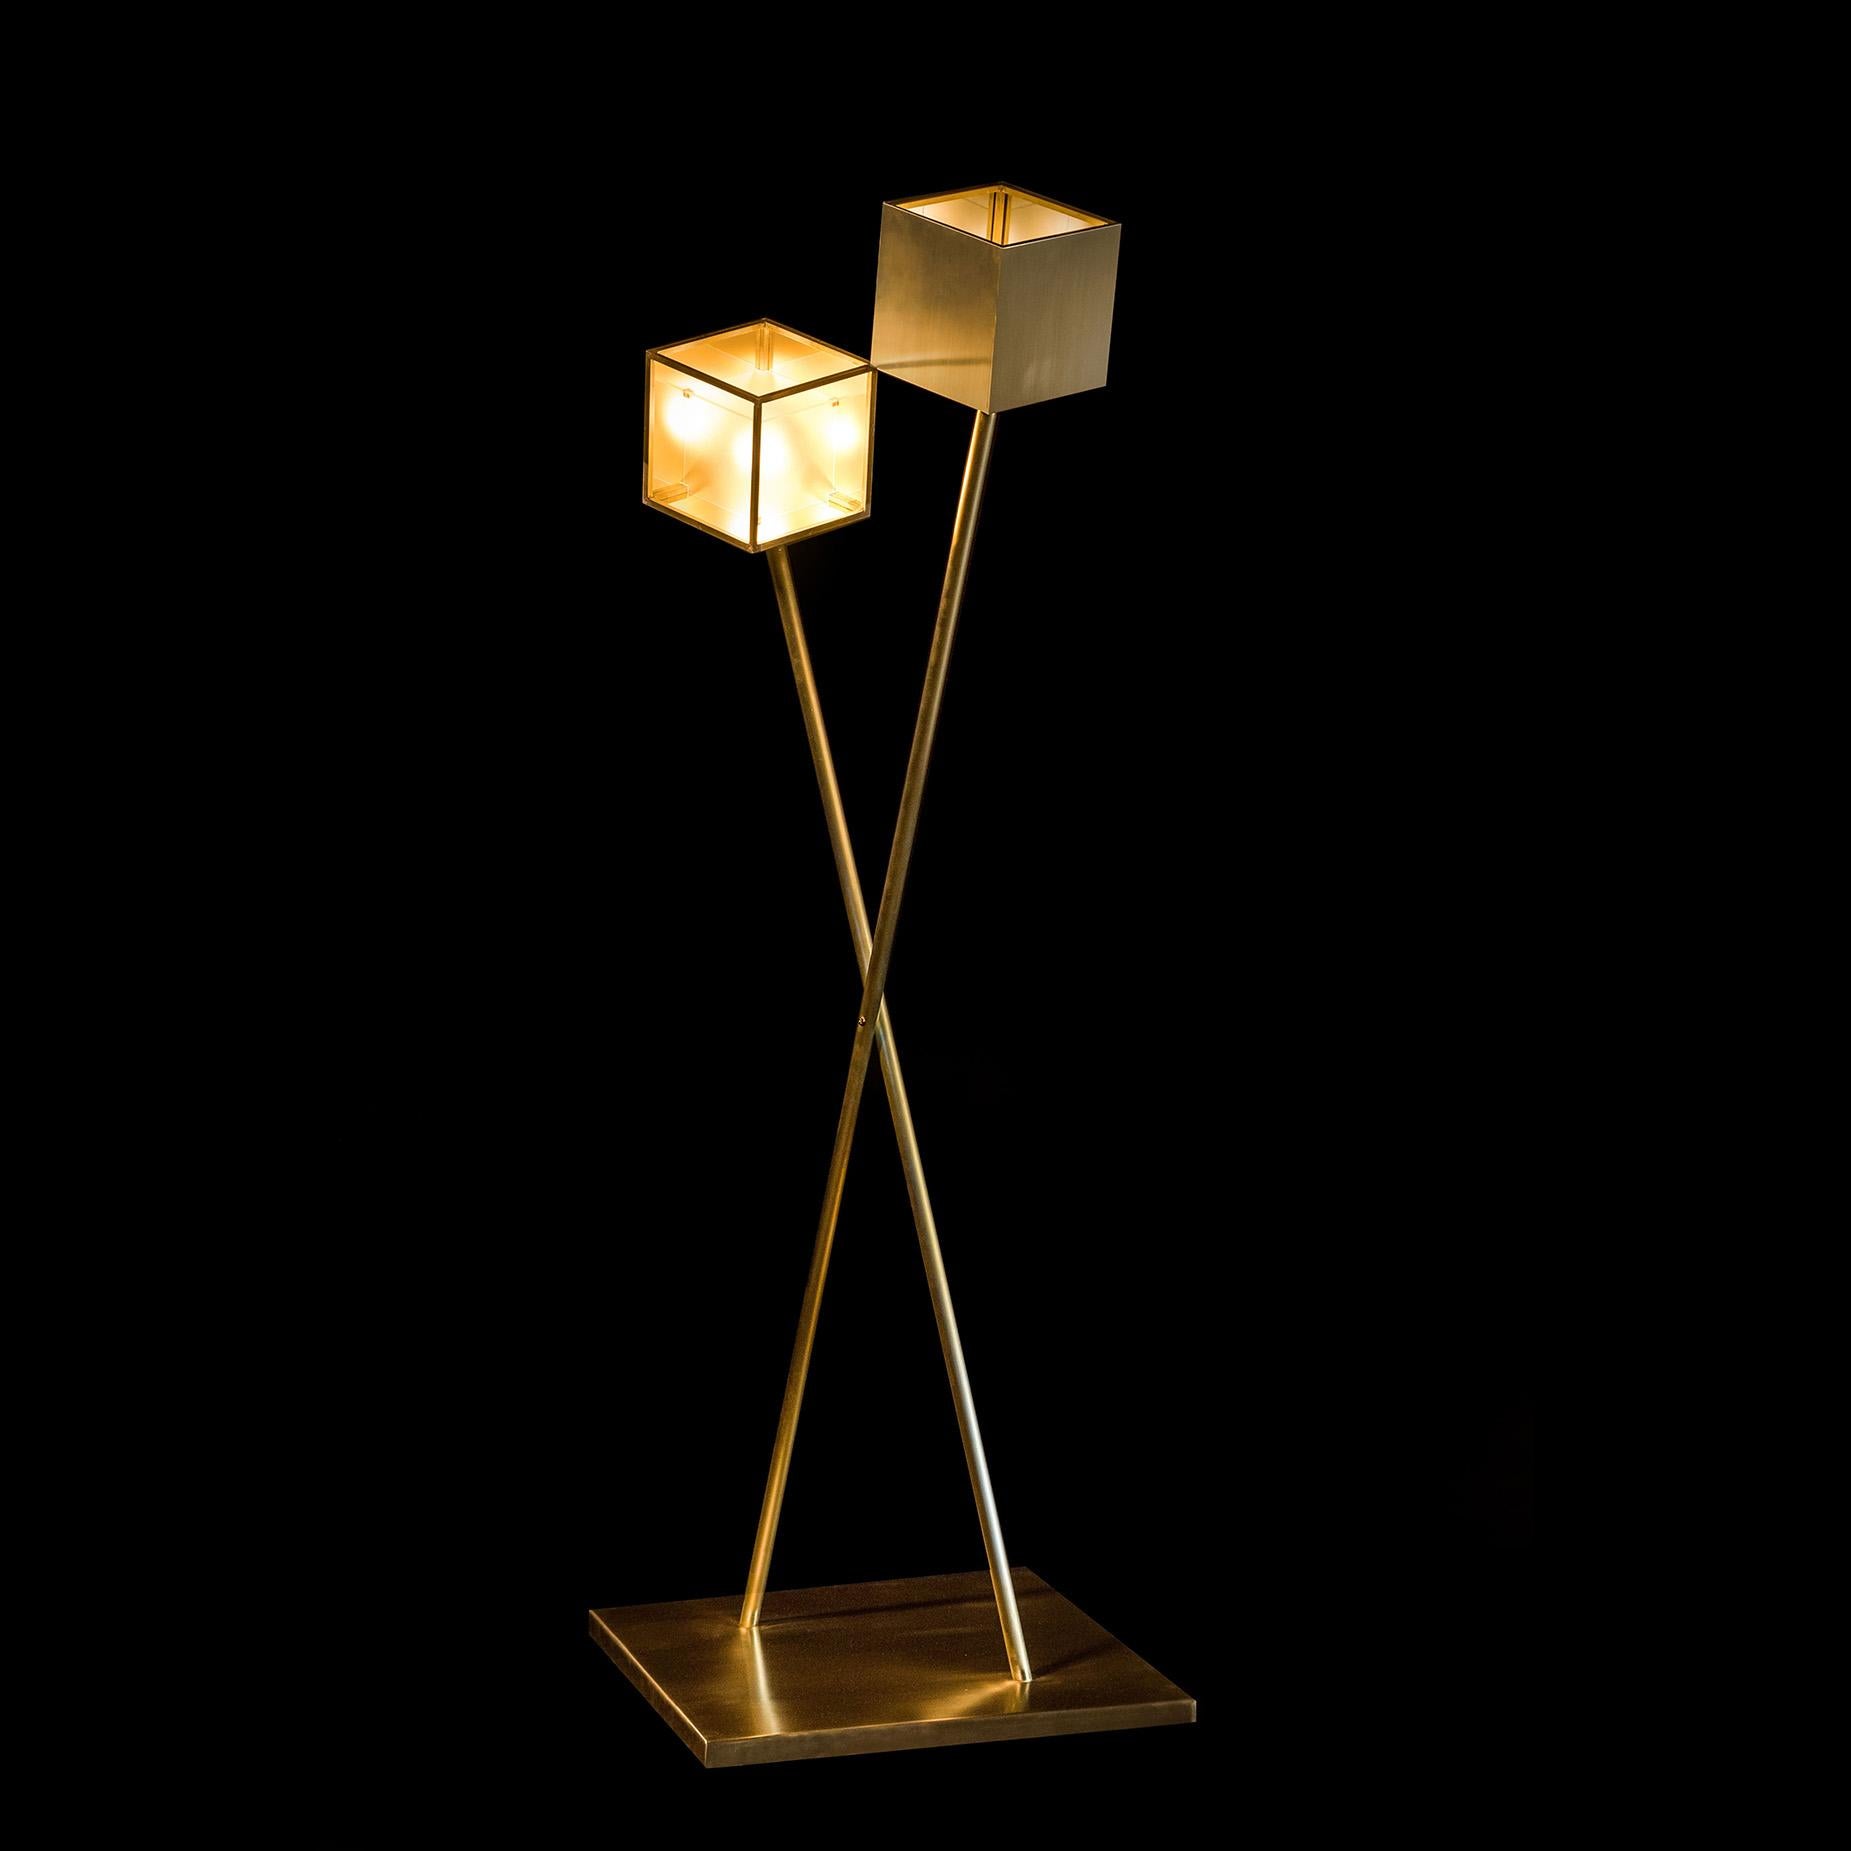 Polished Flis Sculptural Floor Lamp Brass by Diaphan Studio, REP by Tuleste Factory